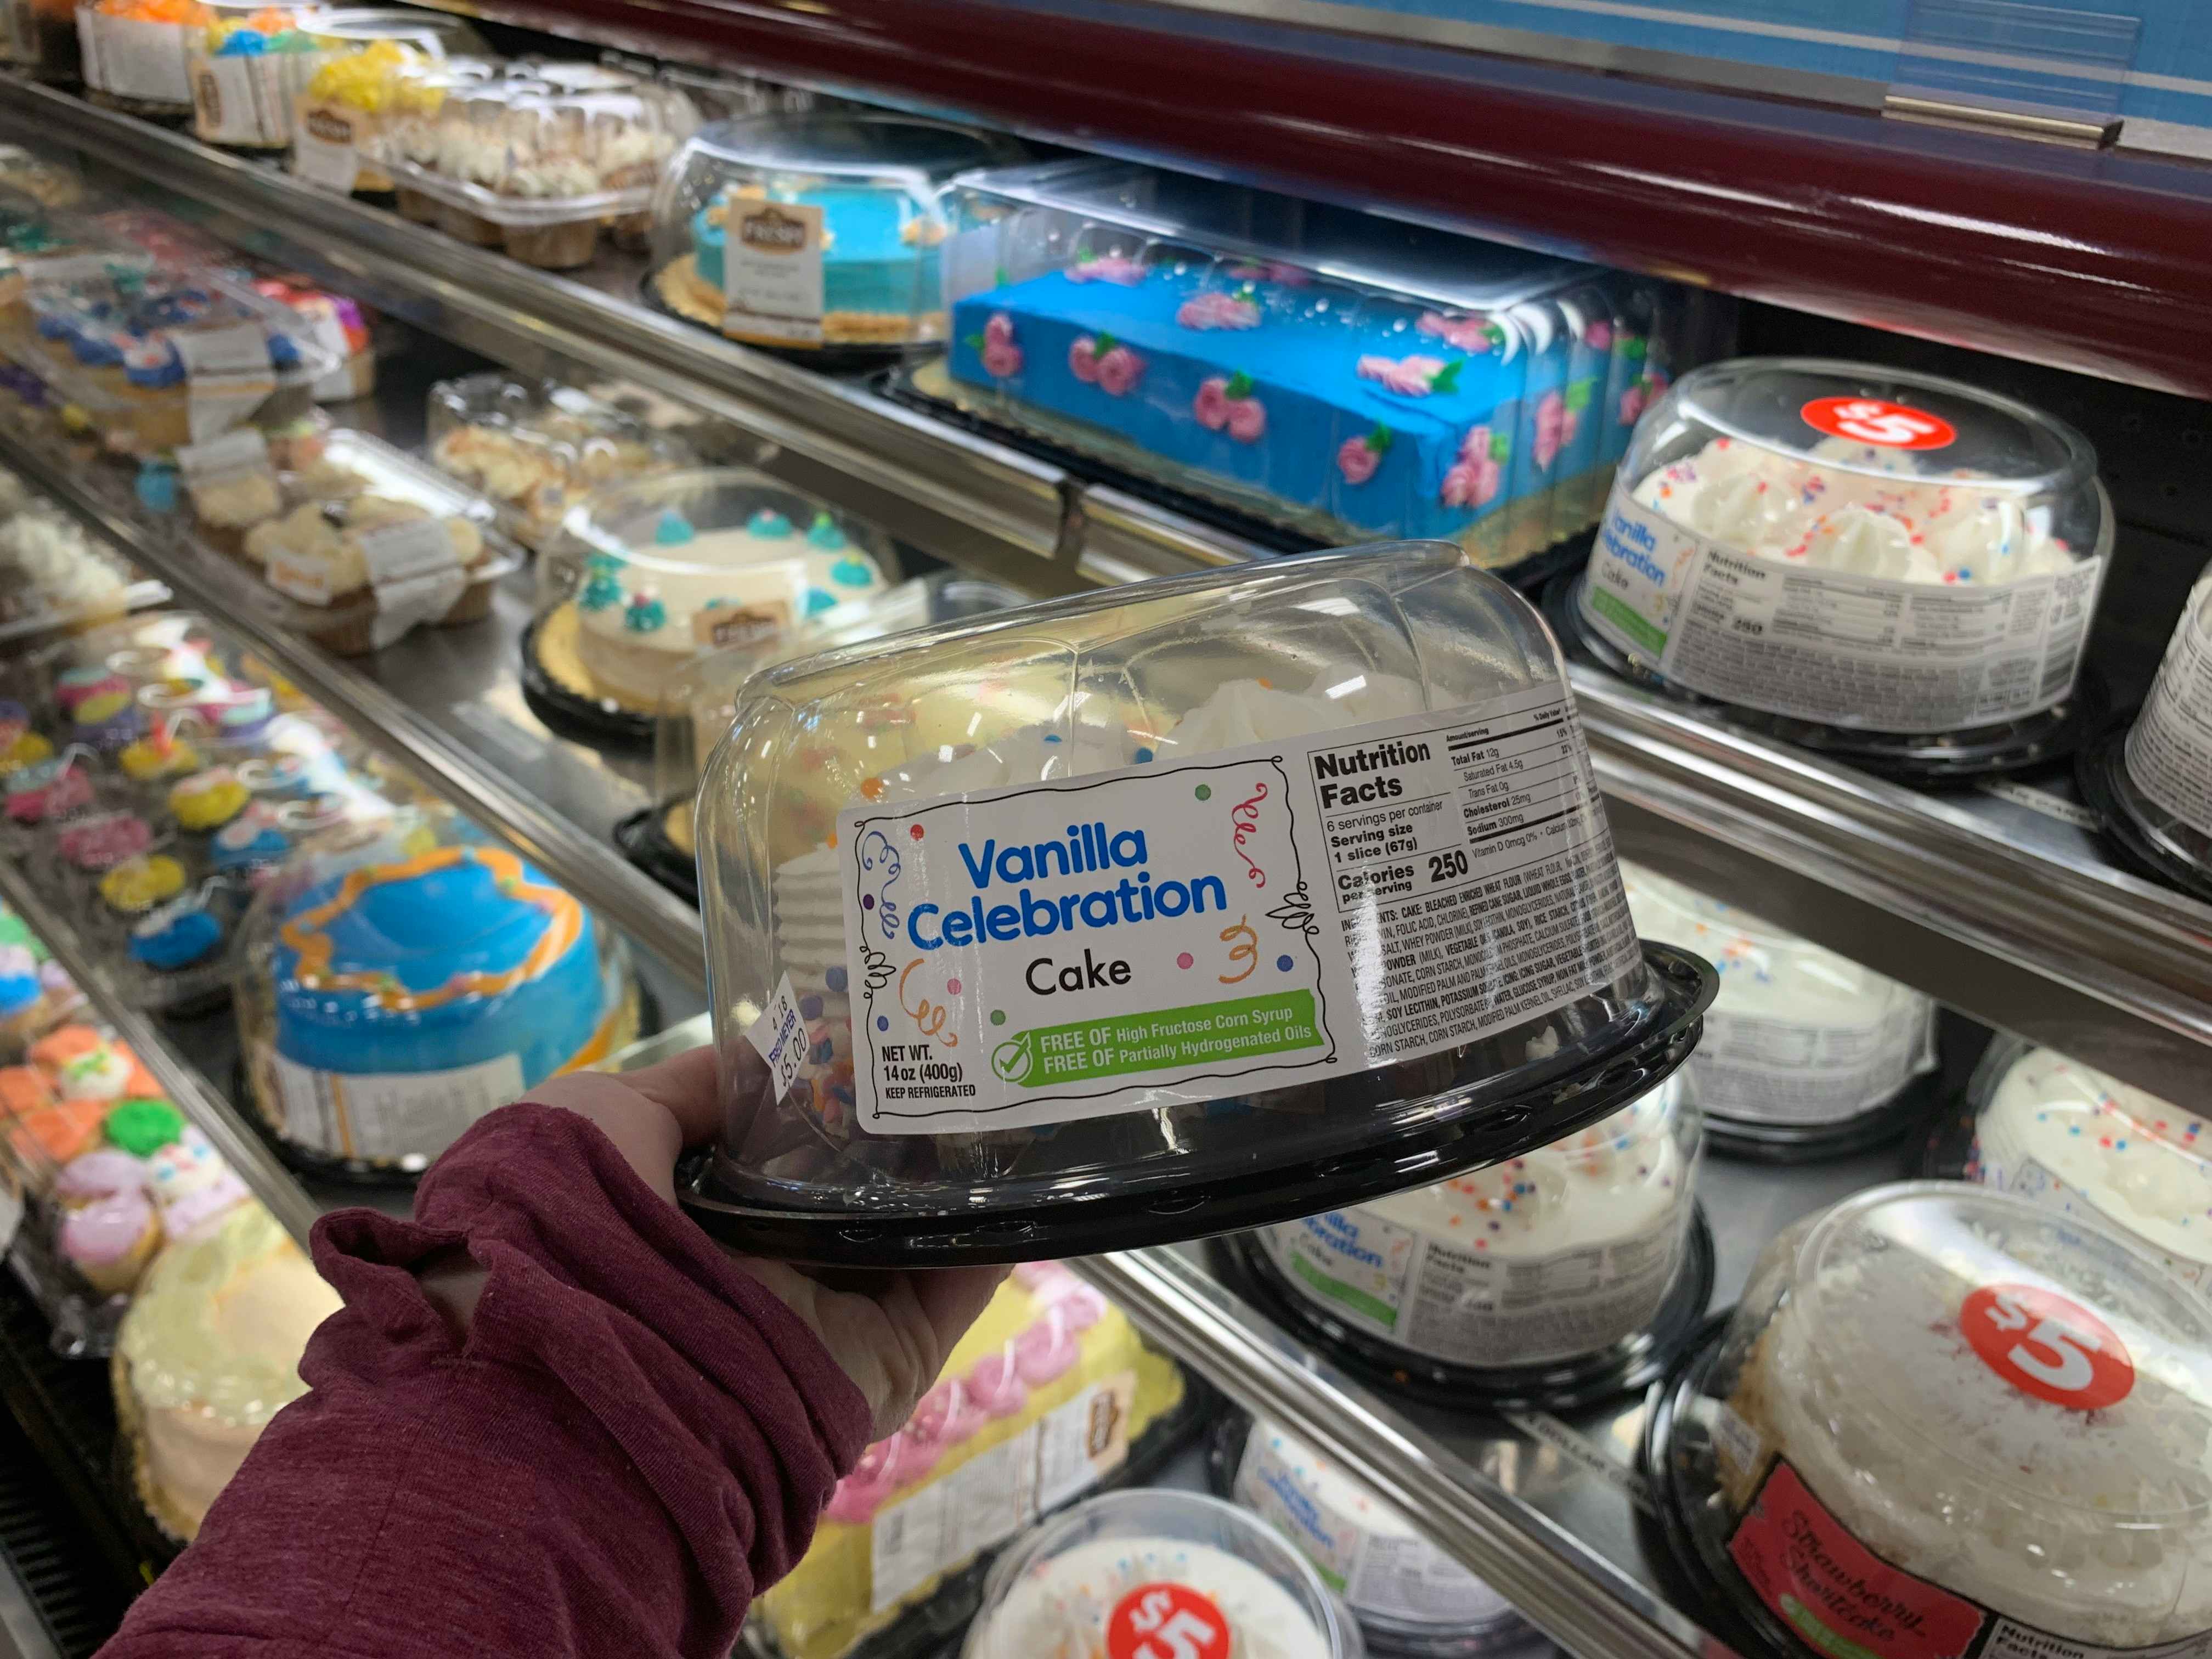 Get a free birthday cake for your kiddos on their first birthday from Harris Teeter.